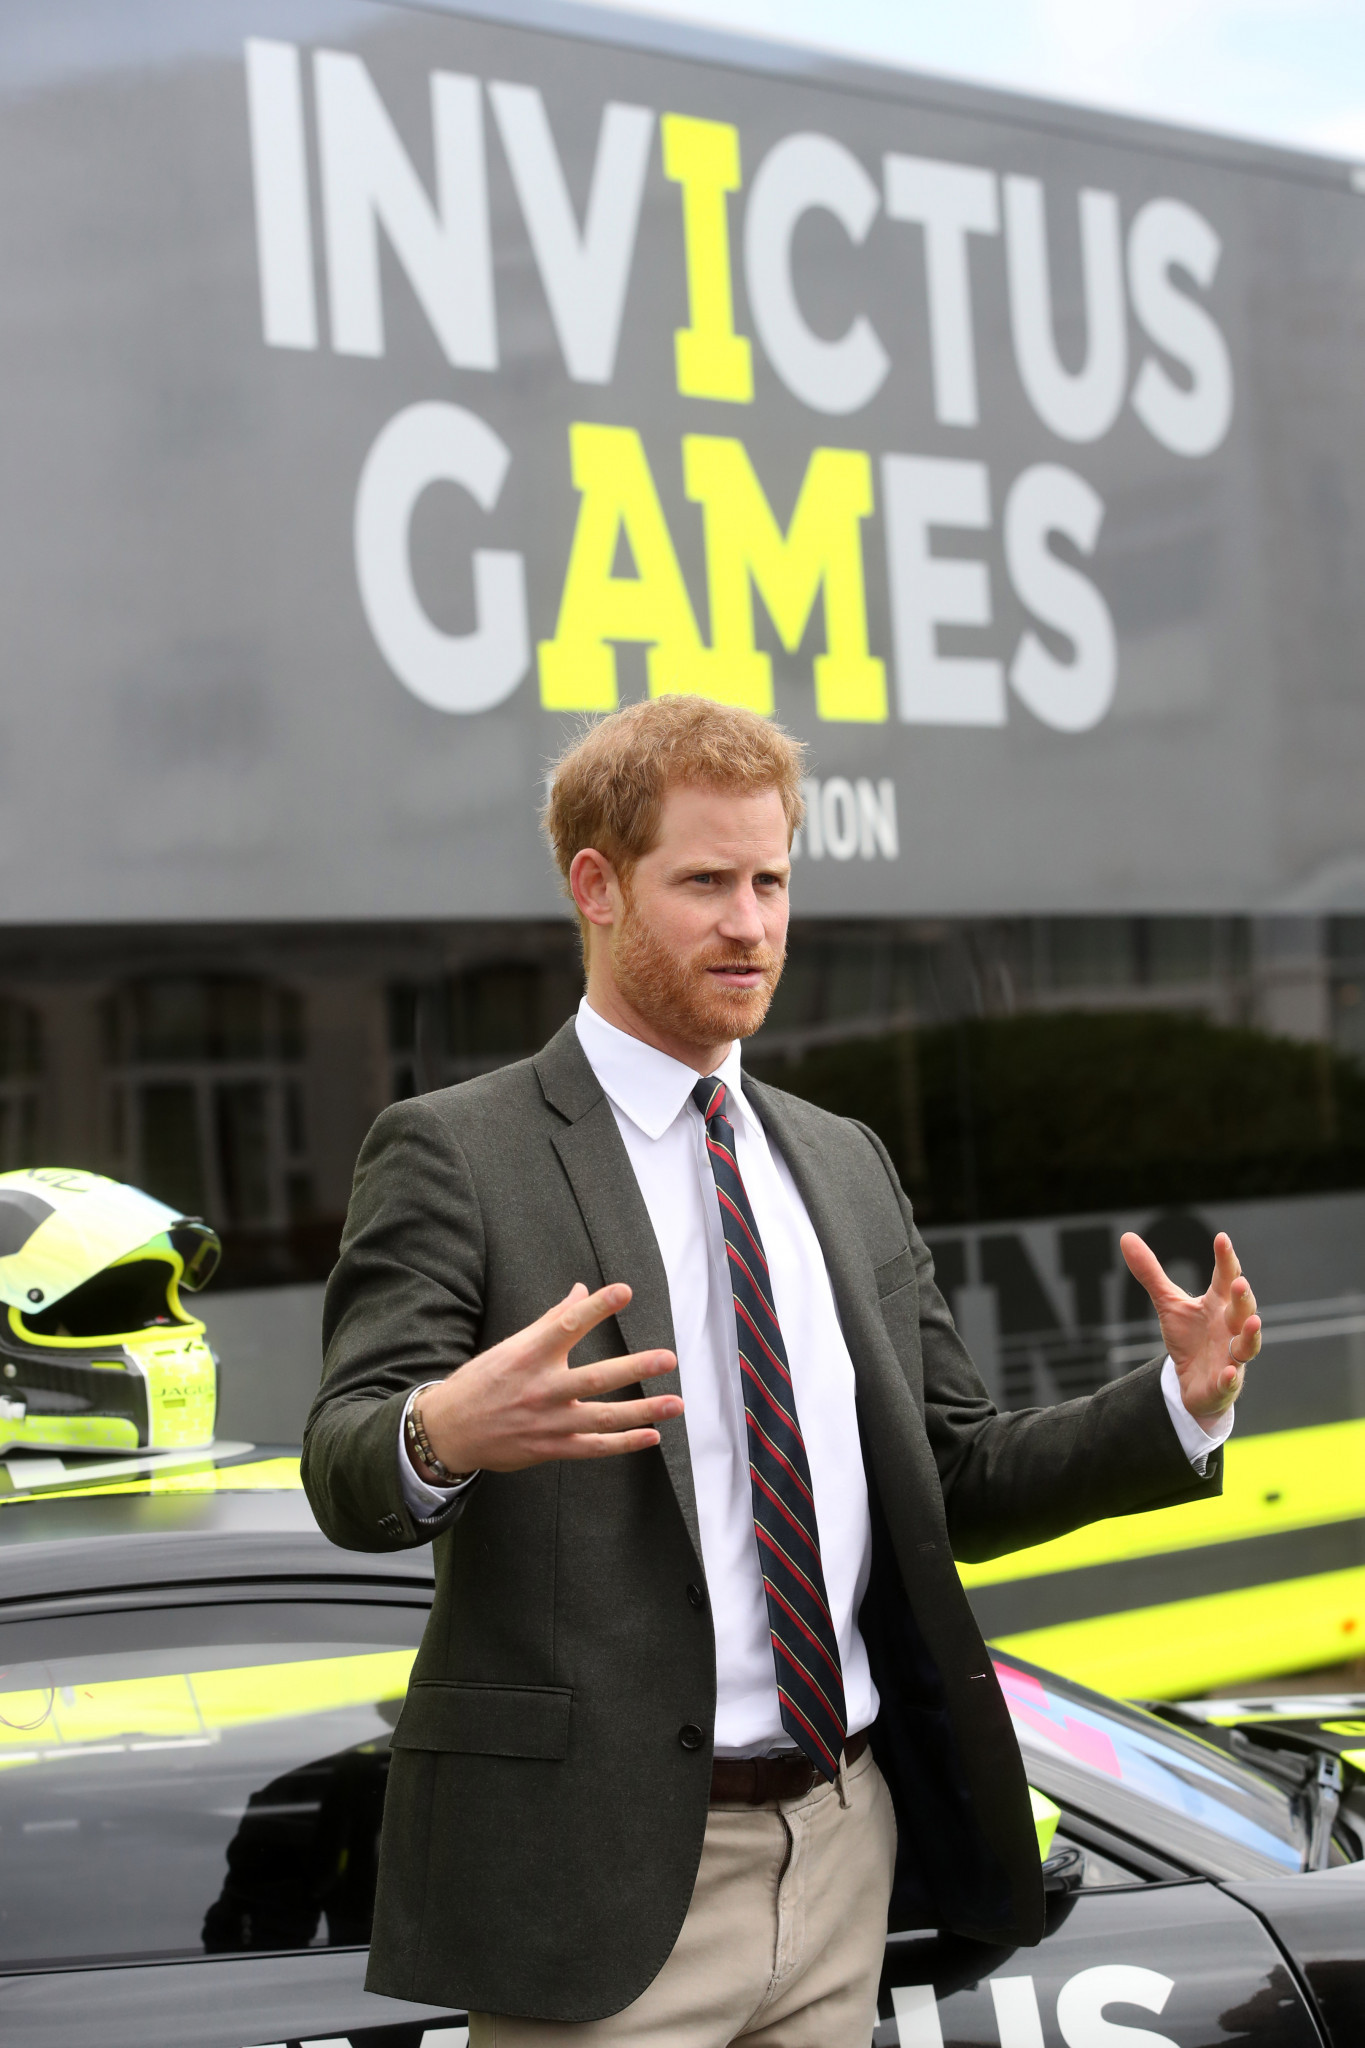 The Invictus Games was created by British Royal Prince Harry in 2014 as a means to help wounded service personnel overcome their physical and mental scars ©Getty Images